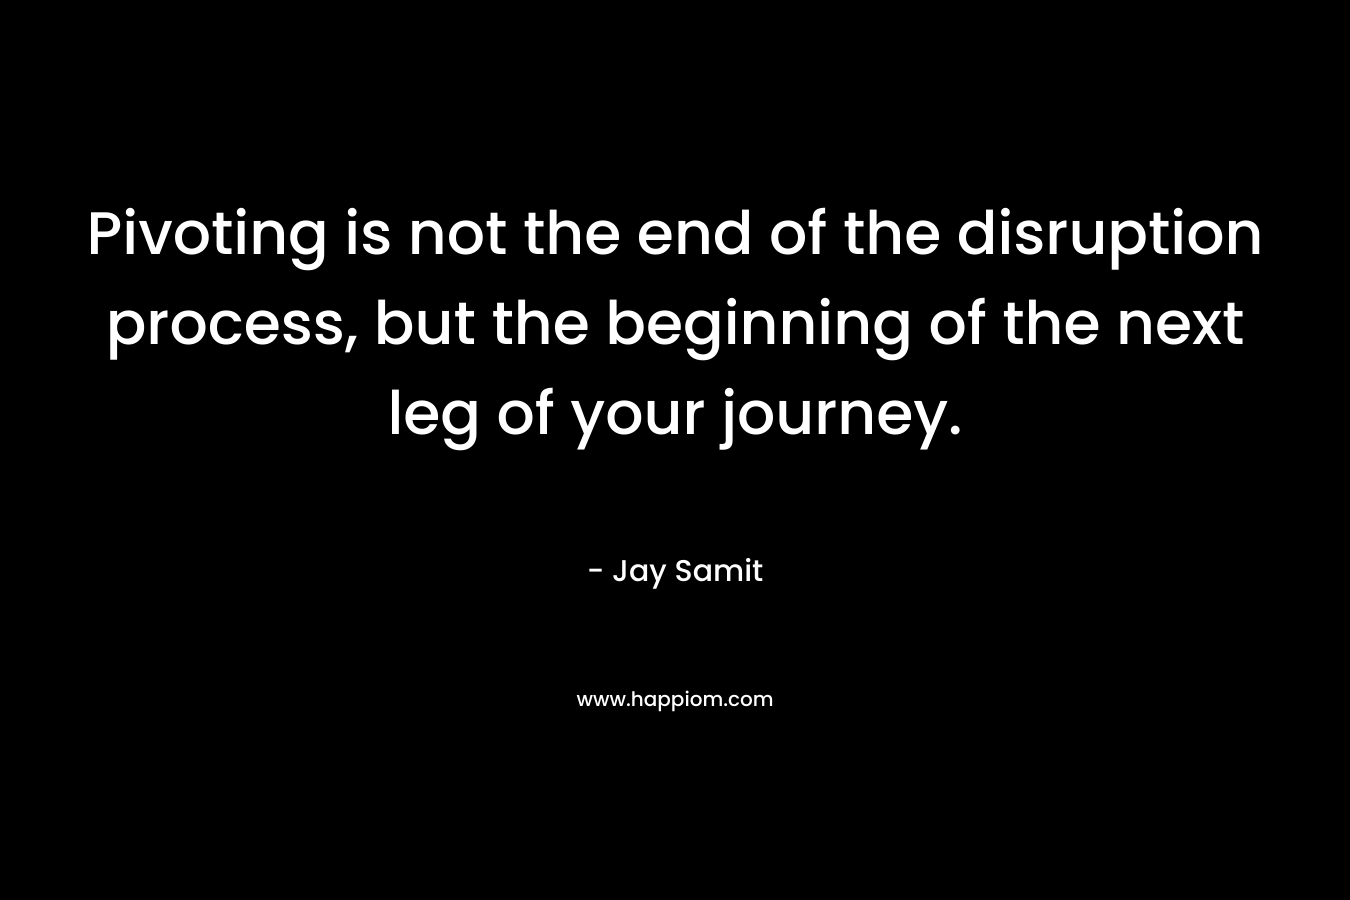 Pivoting is not the end of the disruption process, but the beginning of the next leg of your journey. – Jay Samit